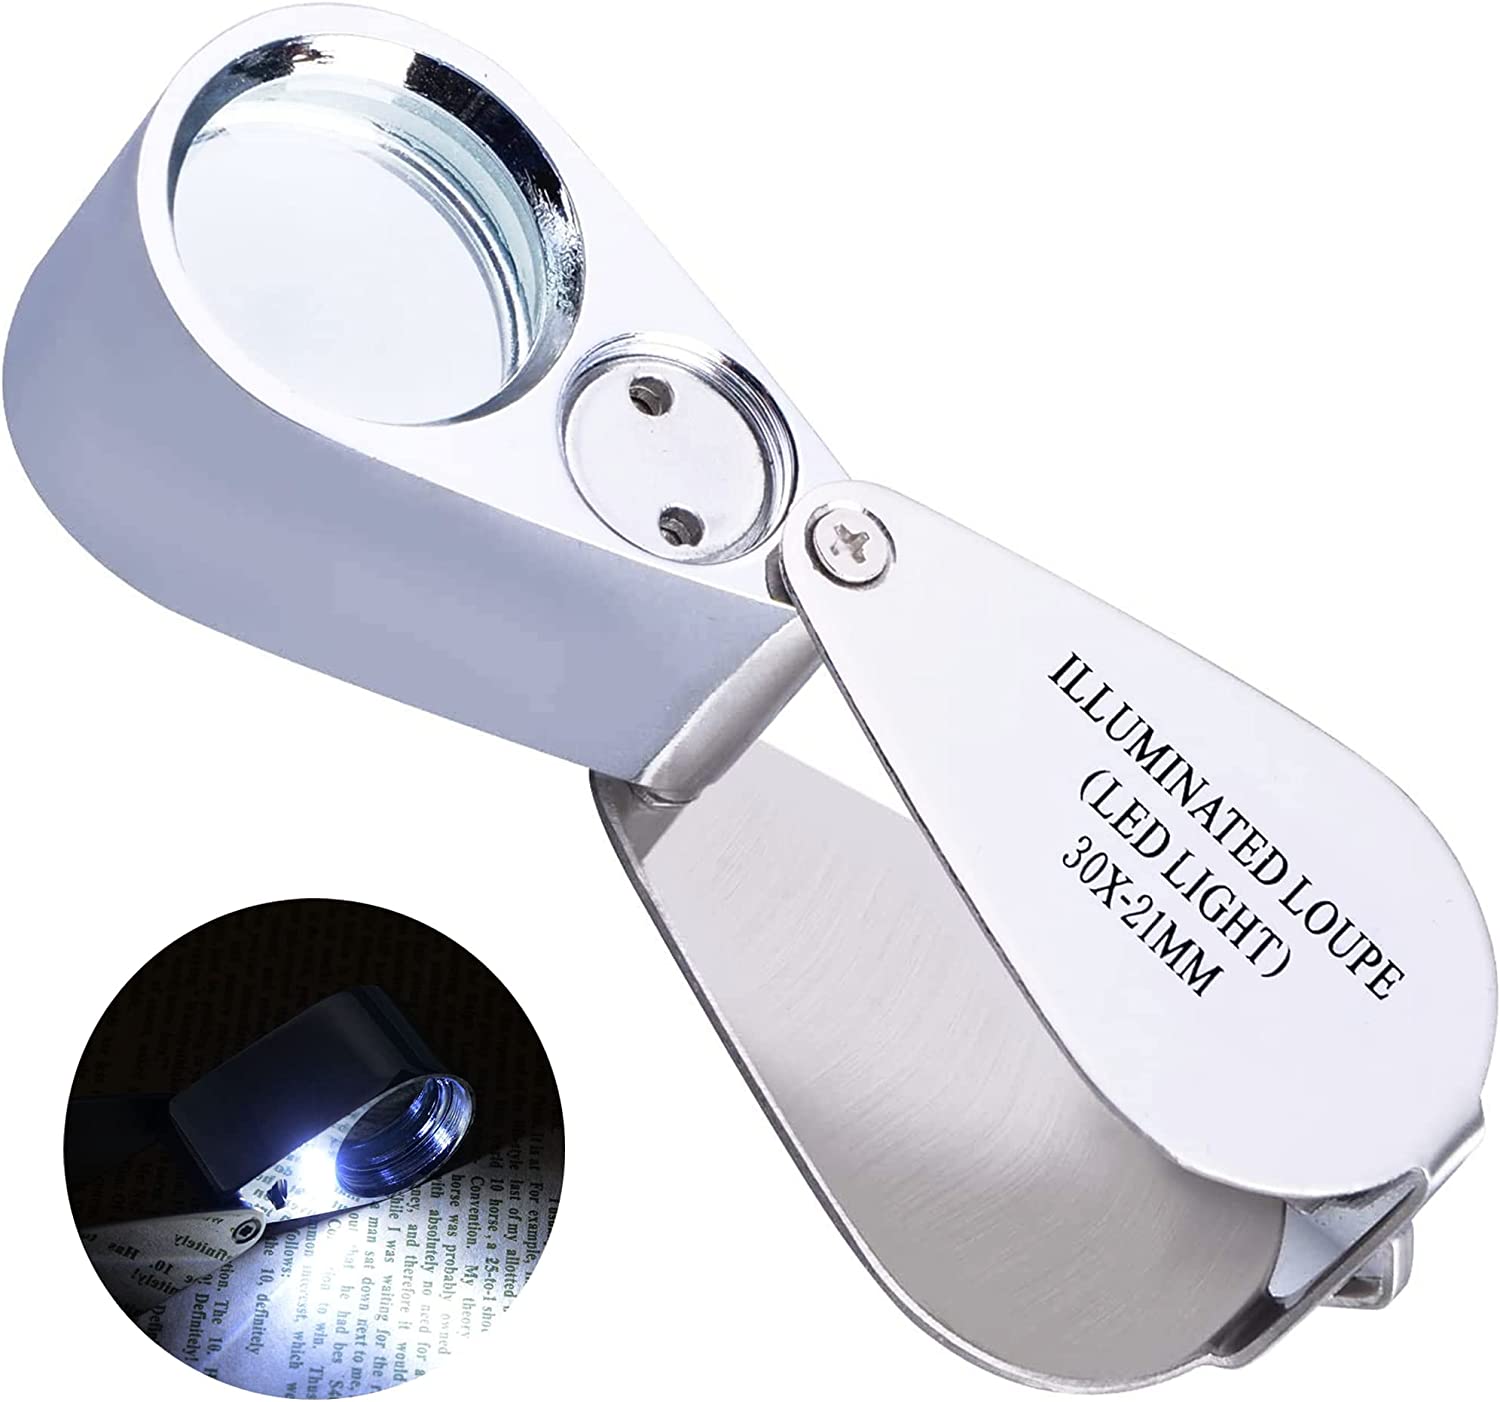 30X Jewelers Loupe Magnifying Glass with Light, Jewelry Magnifier Eye Loop,  Metal Pocket Magnifying Glass for Jewelry, Plants, Diamonds, Gems, Coins